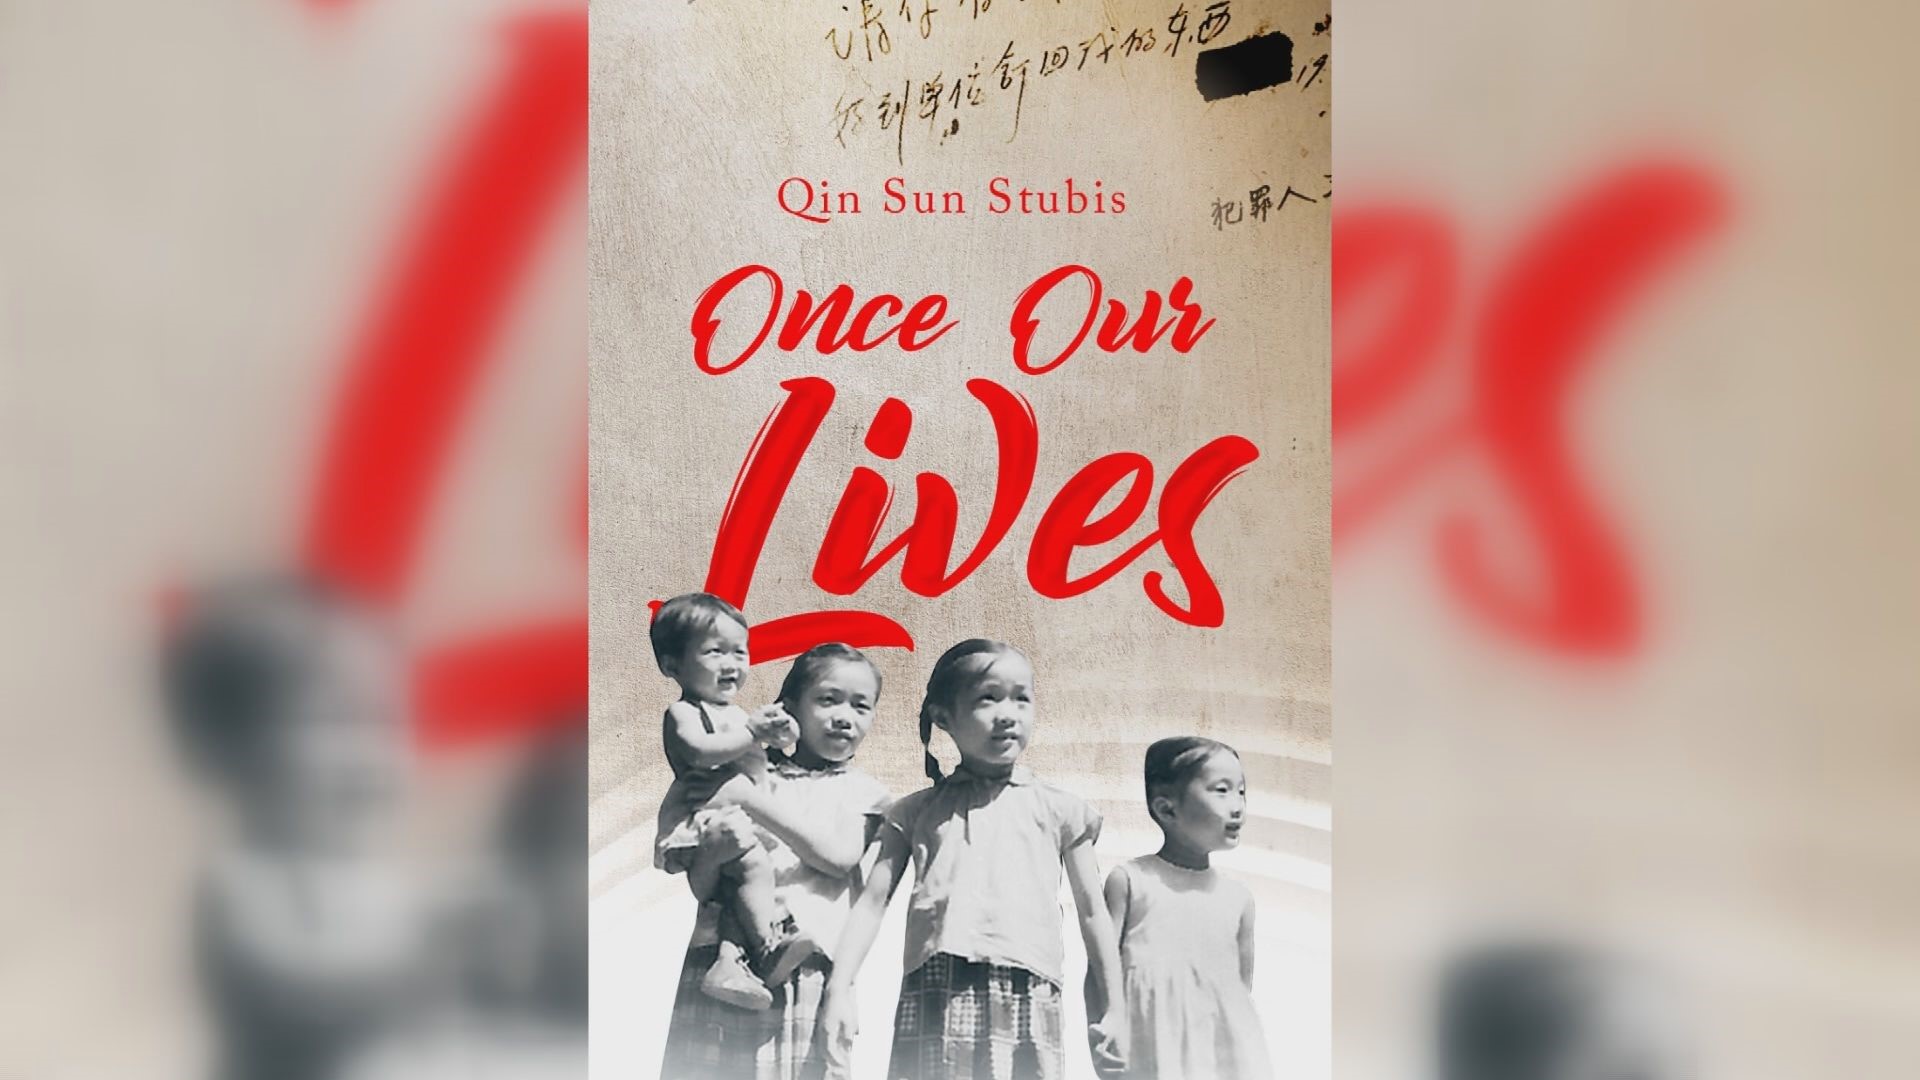 DC Author Qin Sun Stubis pens her family memoir called "Once Our Lives" which is an epic adventure into hidden Chinese history.